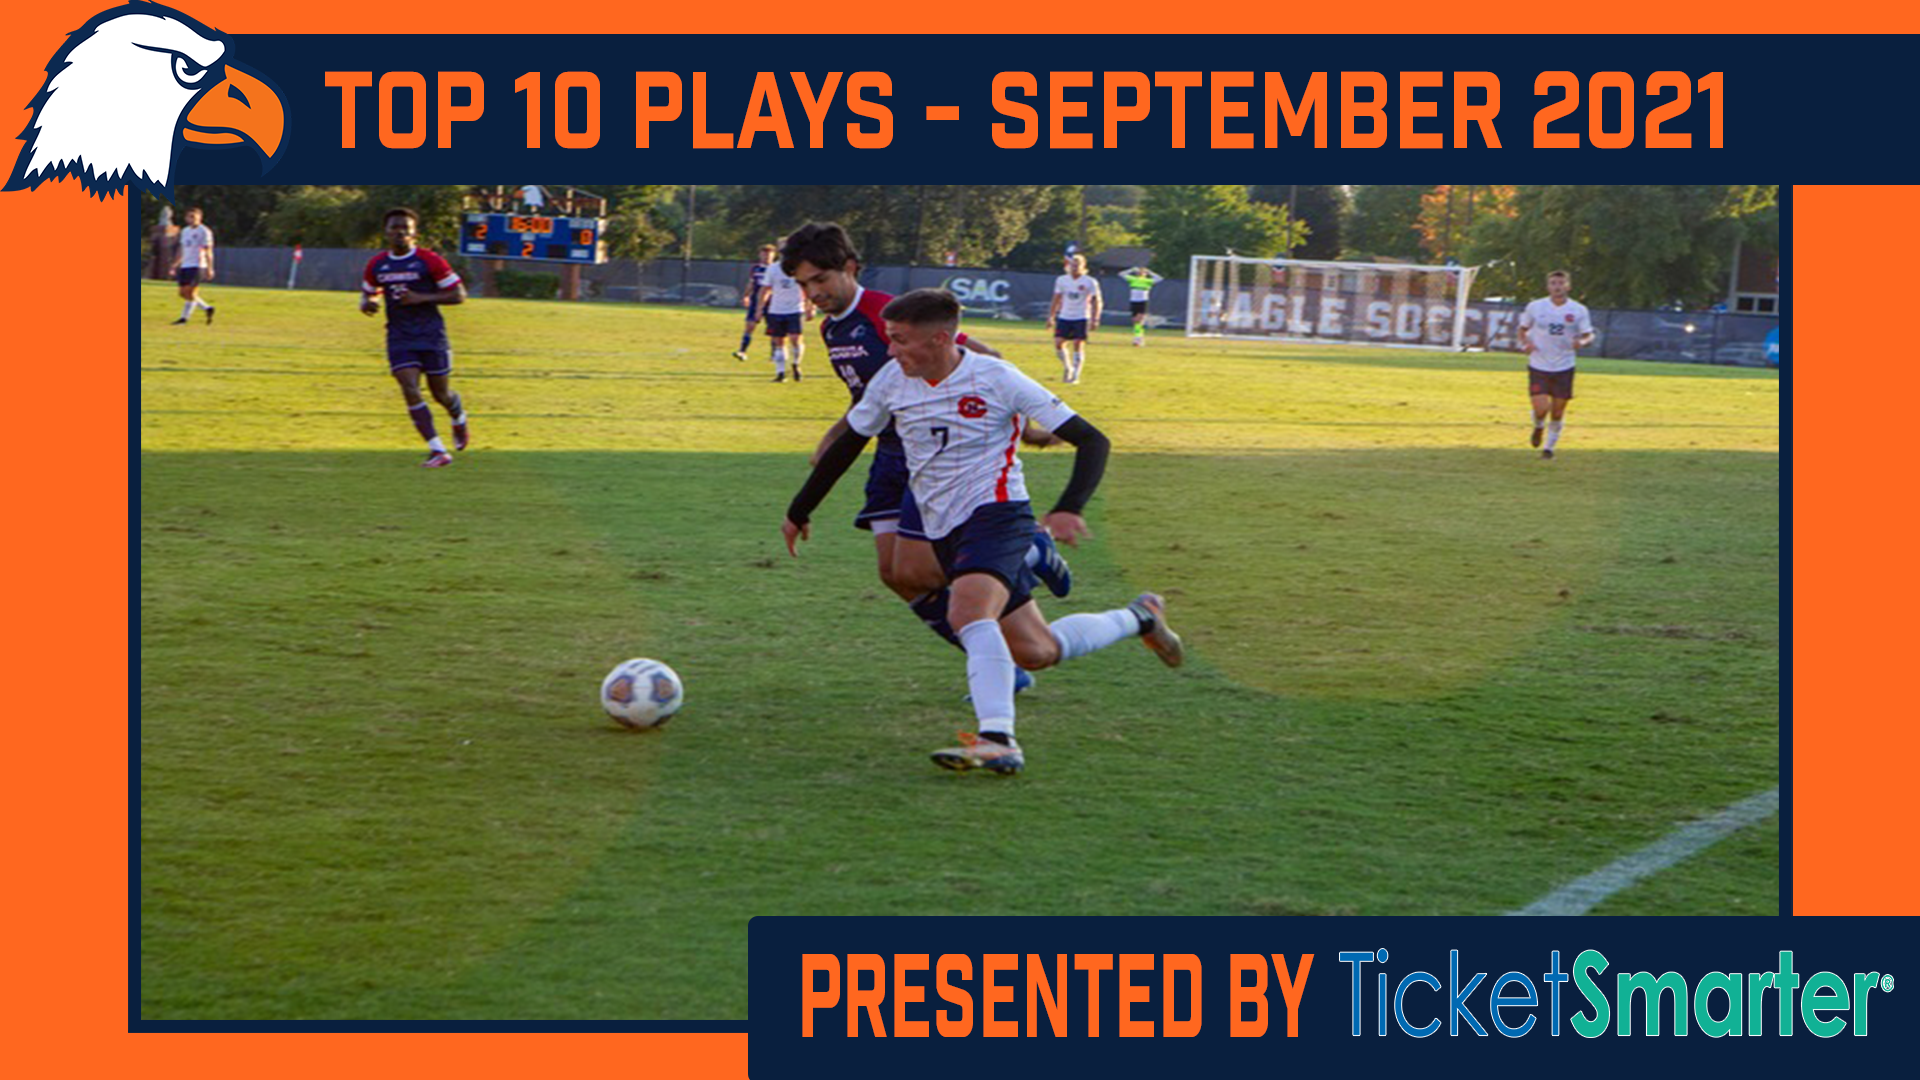 Eagle Sports Network releases Ticketsmarter top 10 plays for the month of September